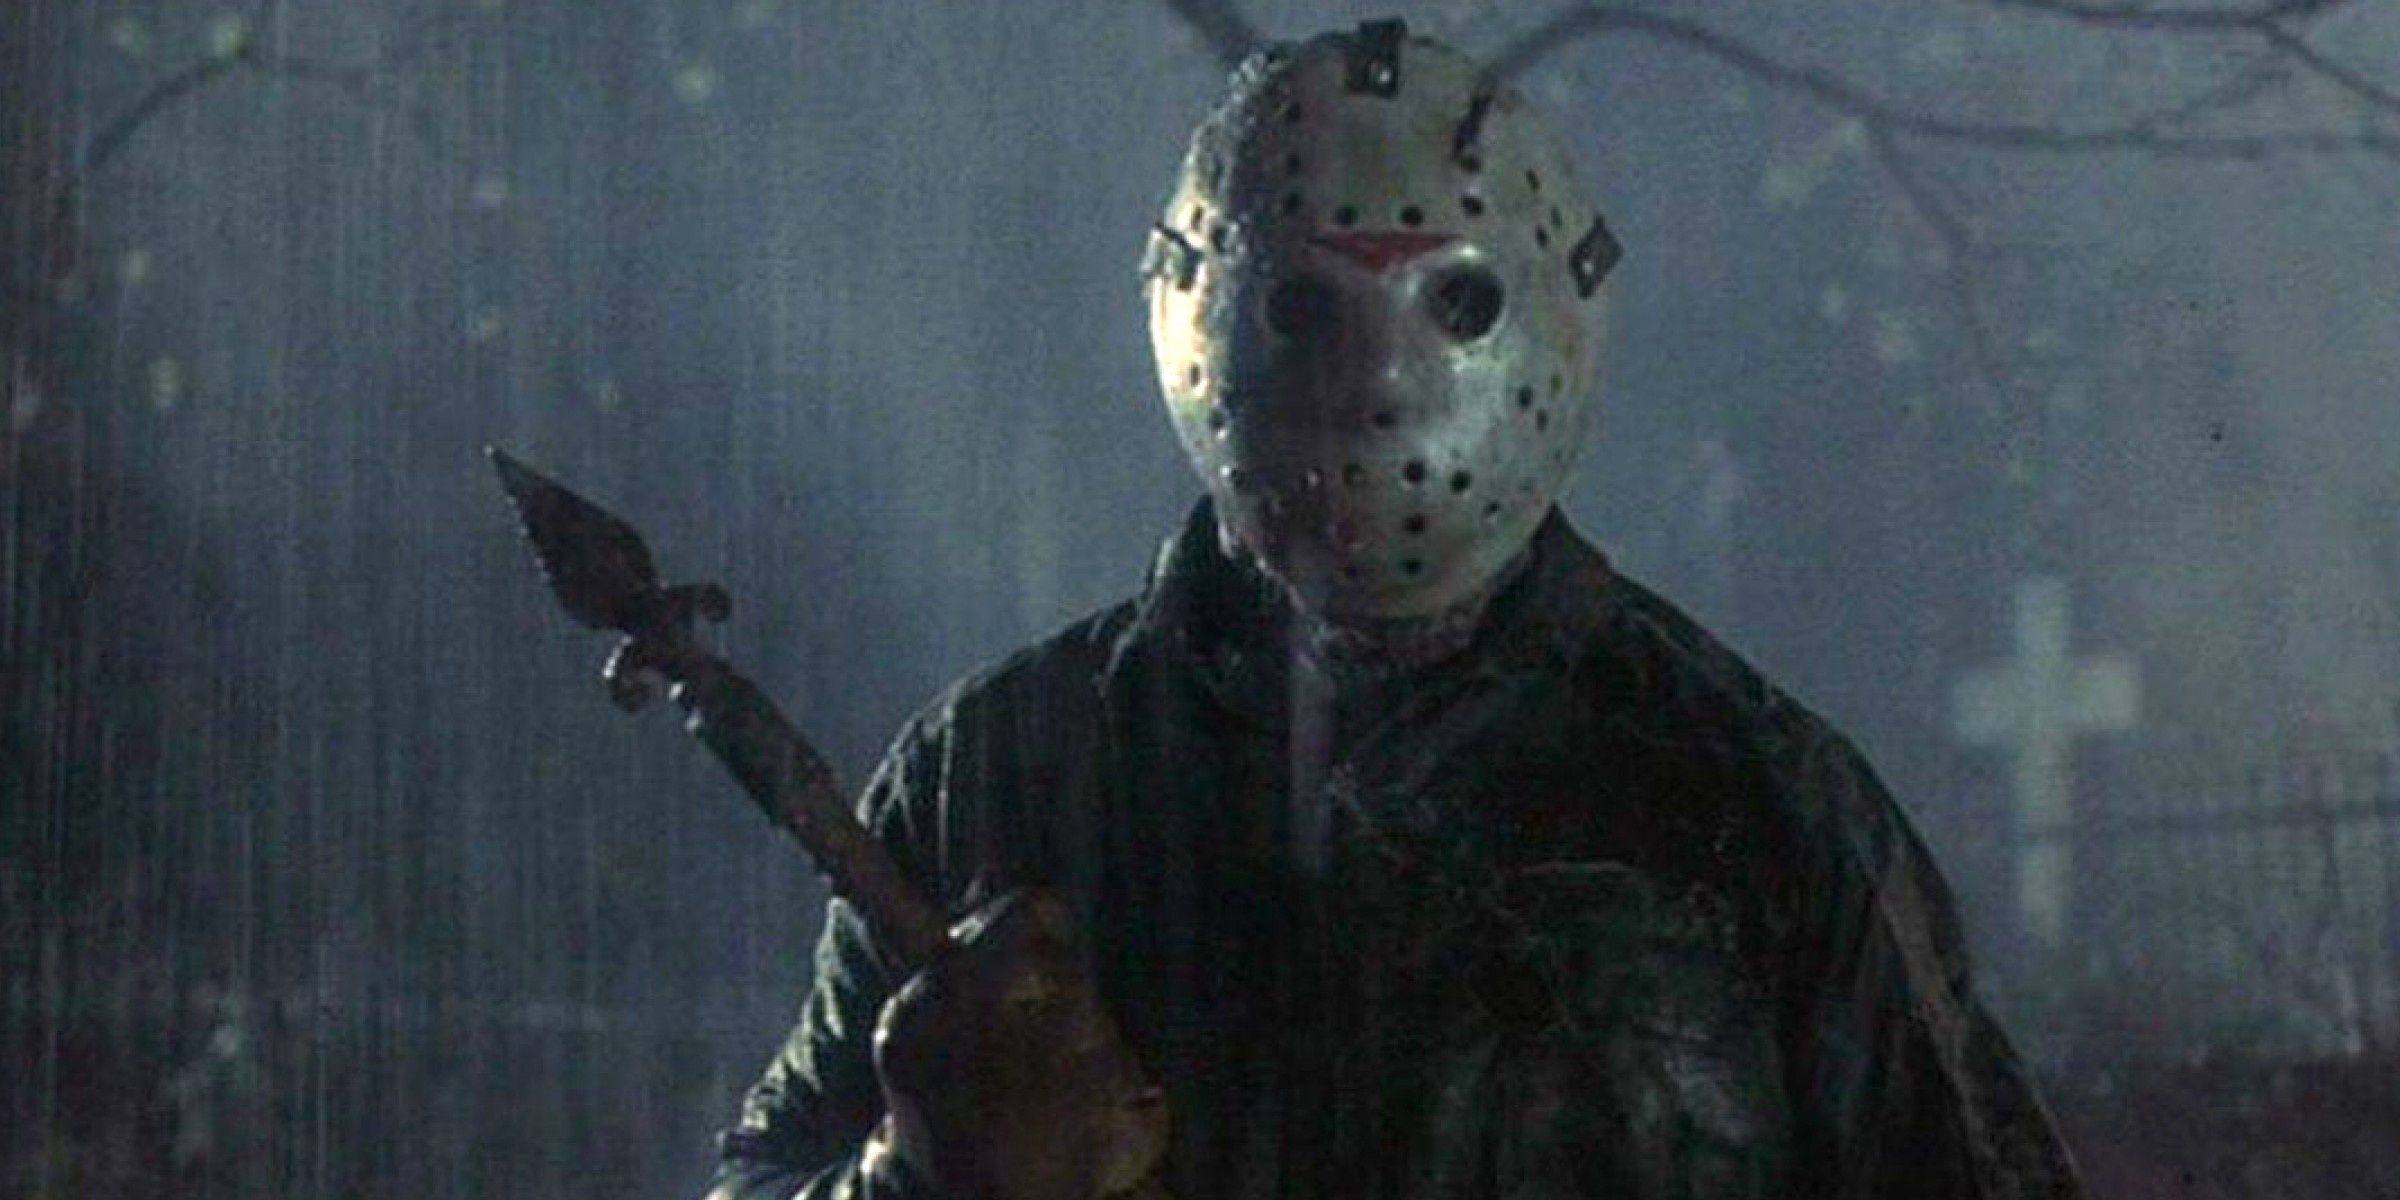 Jason Voorhees uses a fence post after reawakening in the cemetery in Friday the 13th Jason Lives